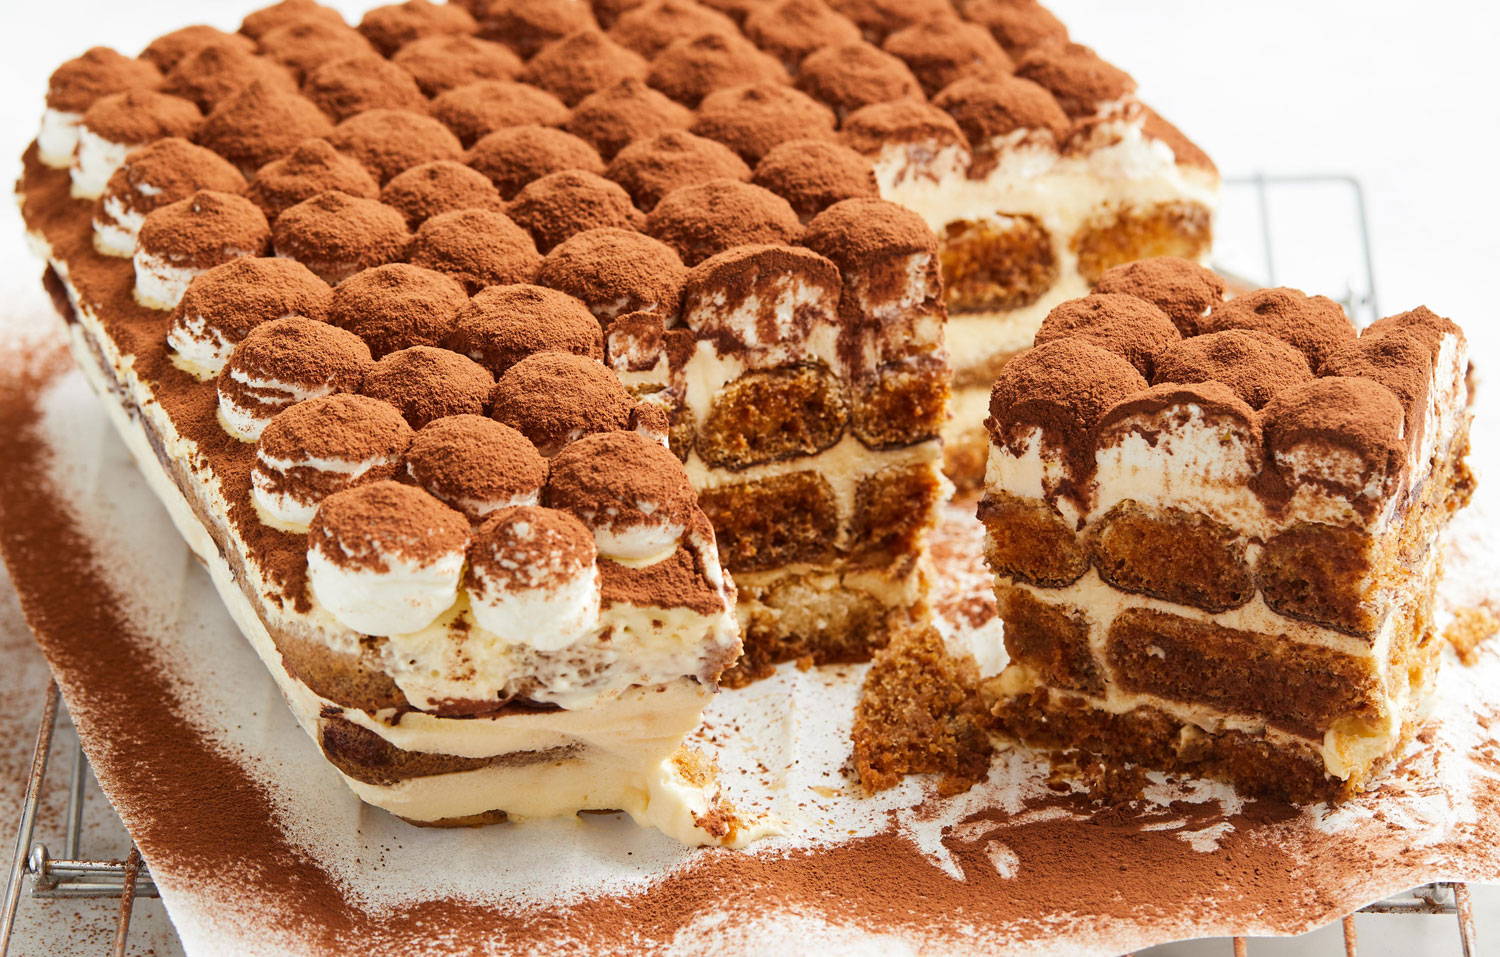 Best Tiramisu Recipe - What Is It And How To Make It - DeLallo